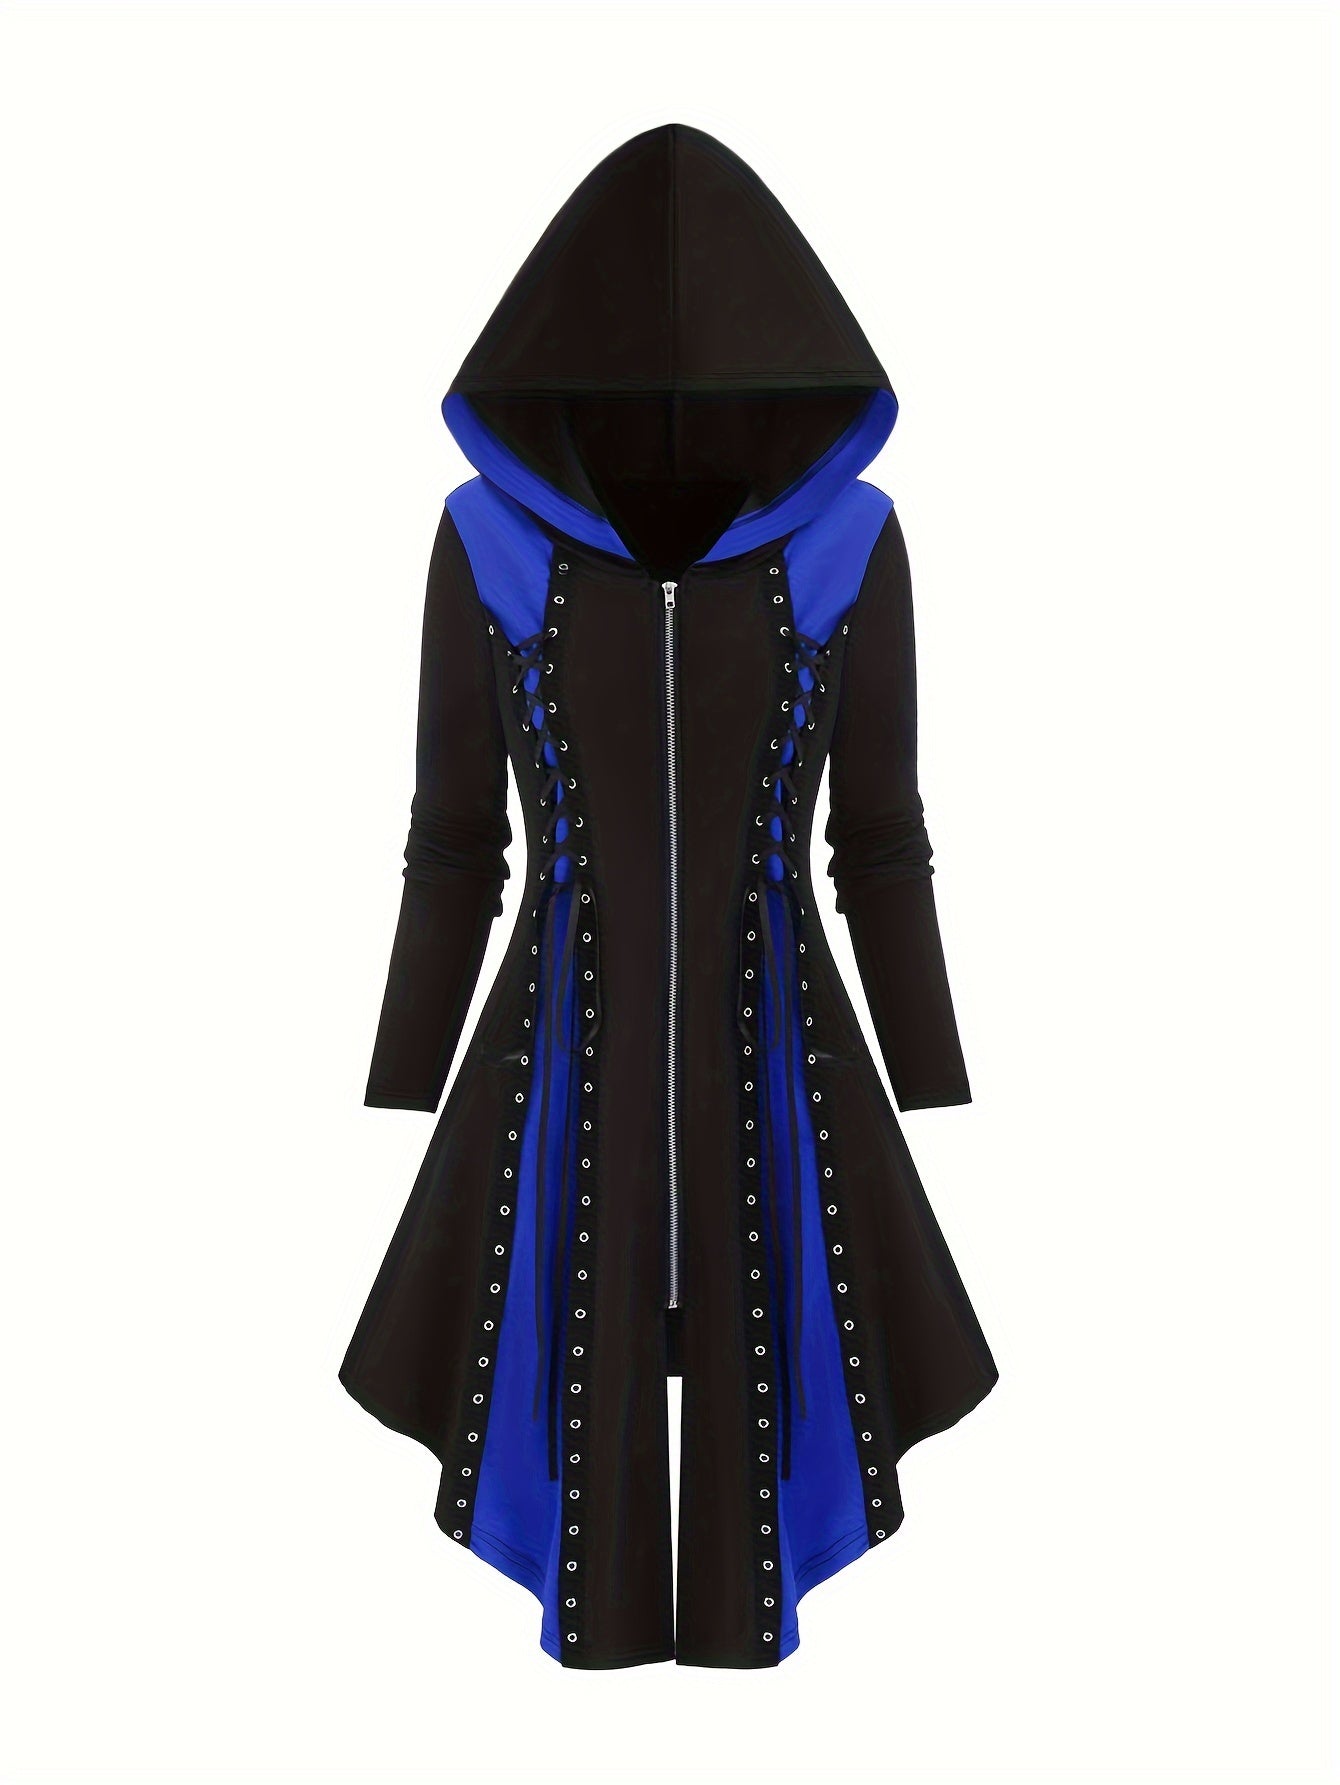 Plus Size Colorblock Zip Front Hooded Dress, Vintage Gothic Eyelet Detail Long Sleeve Dress, Women's Plus Size Clothing